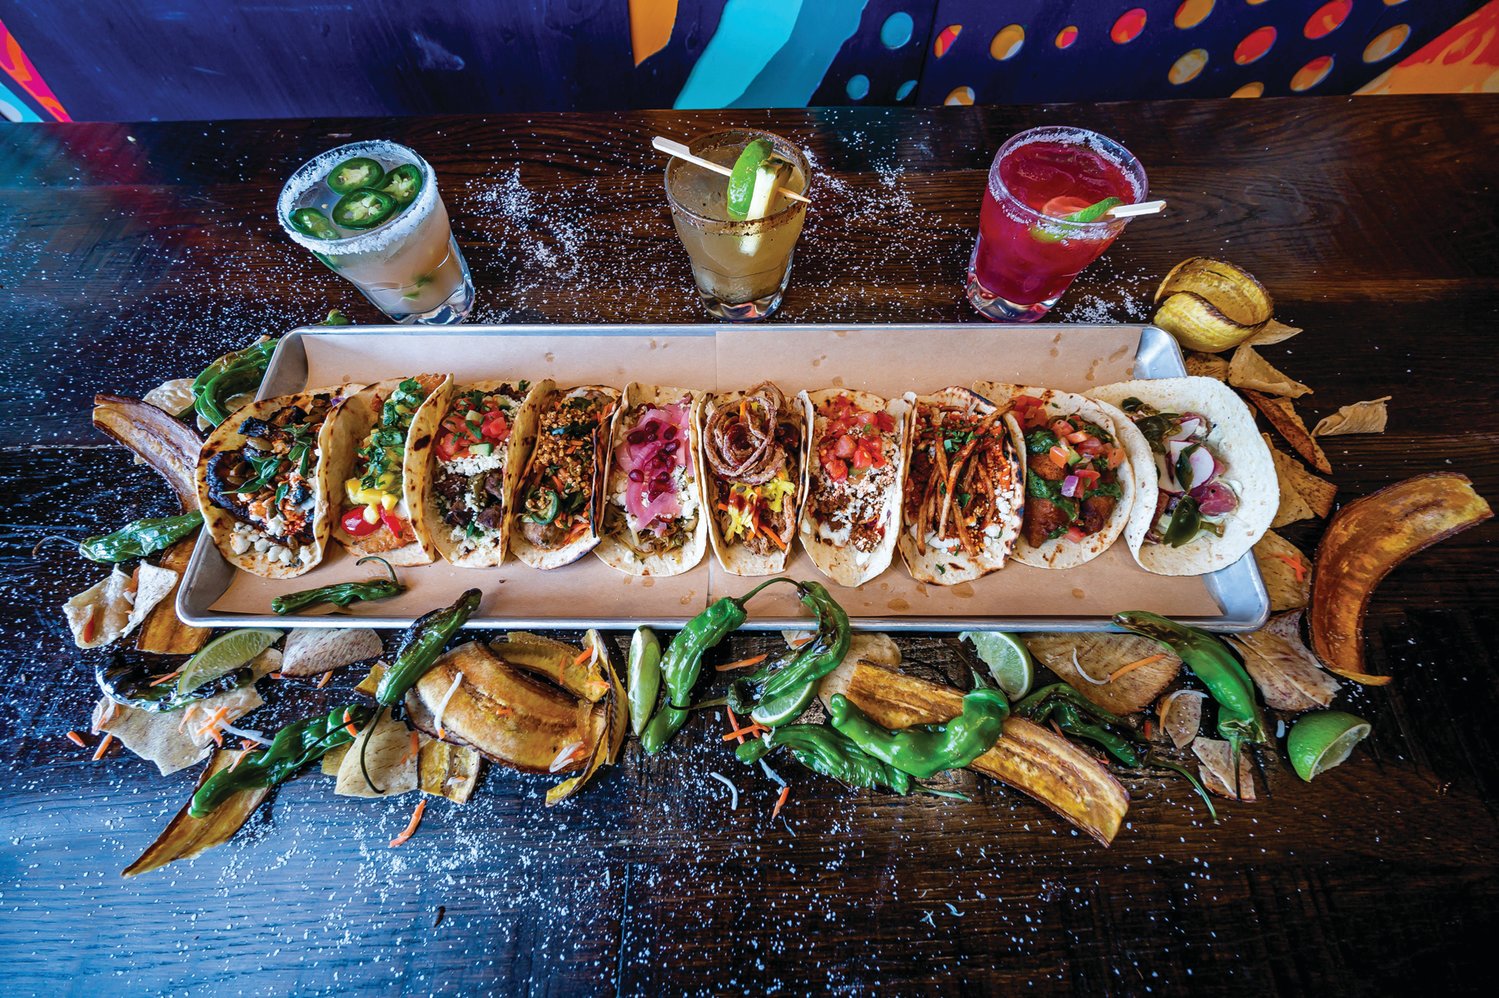 Bomba Taco & Bar, opening in February in Newtown, will offer a variety of taco and drink options.